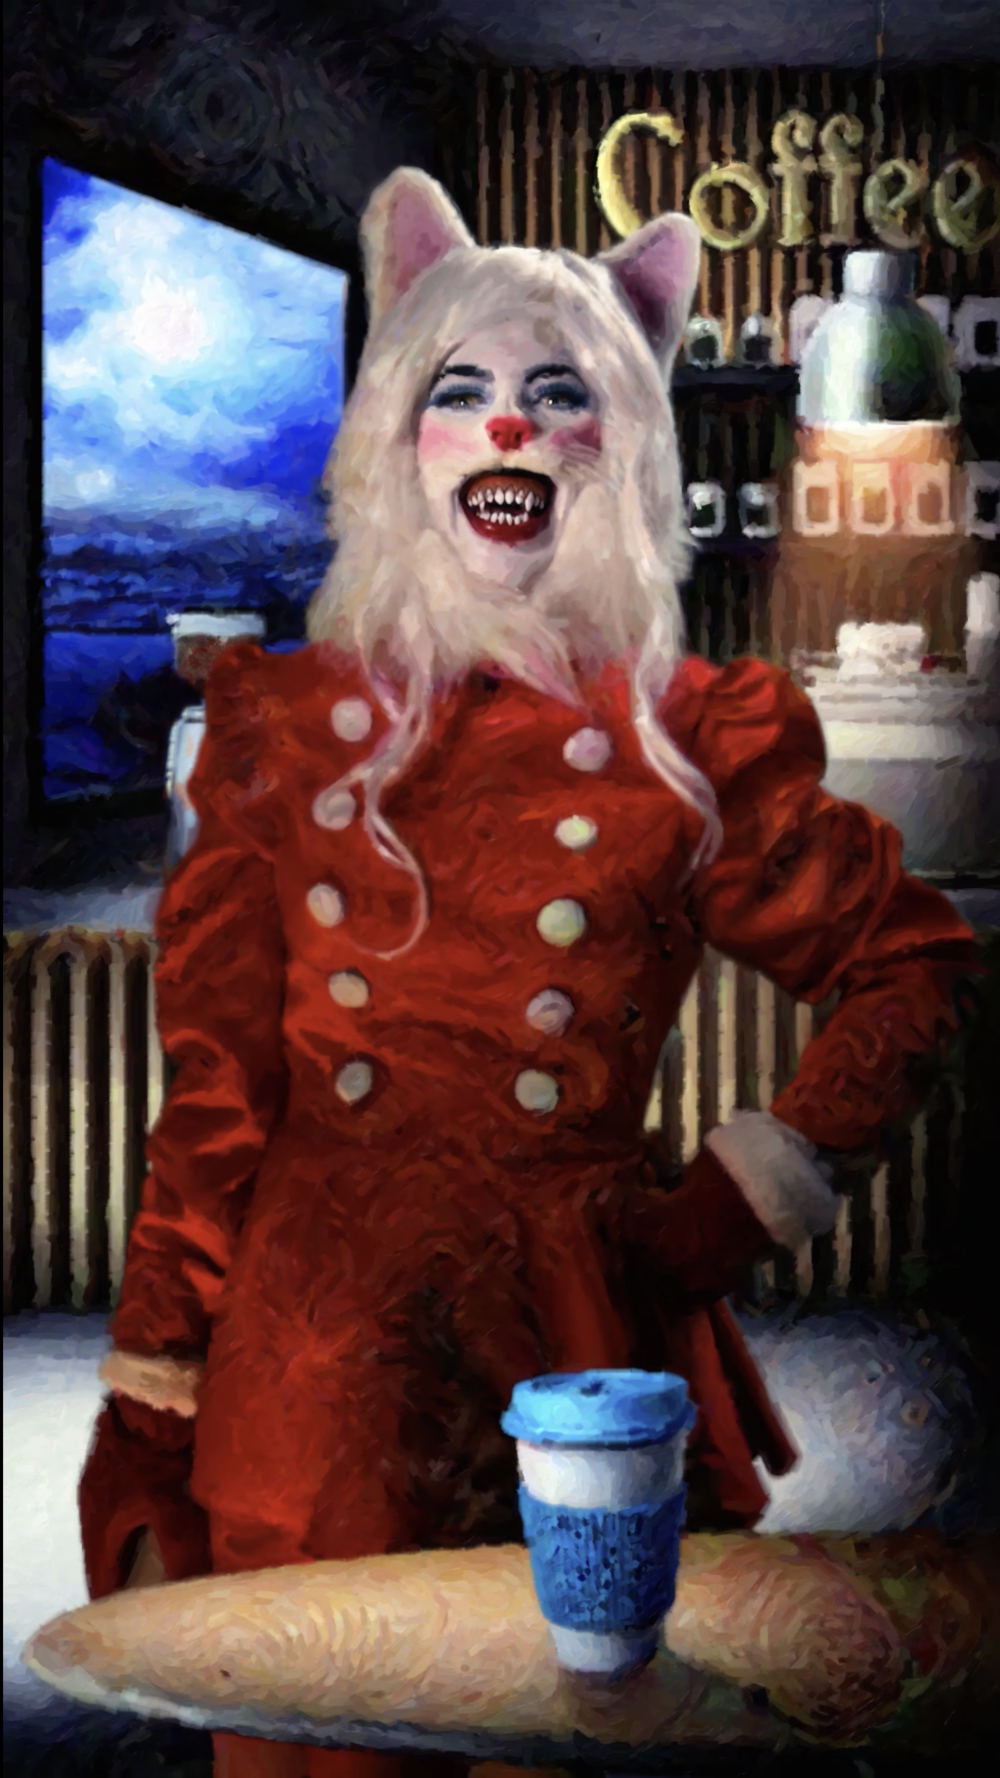 3a-WhiteCat_NativeAnimals_RachelMaclean_ACNY2019.png